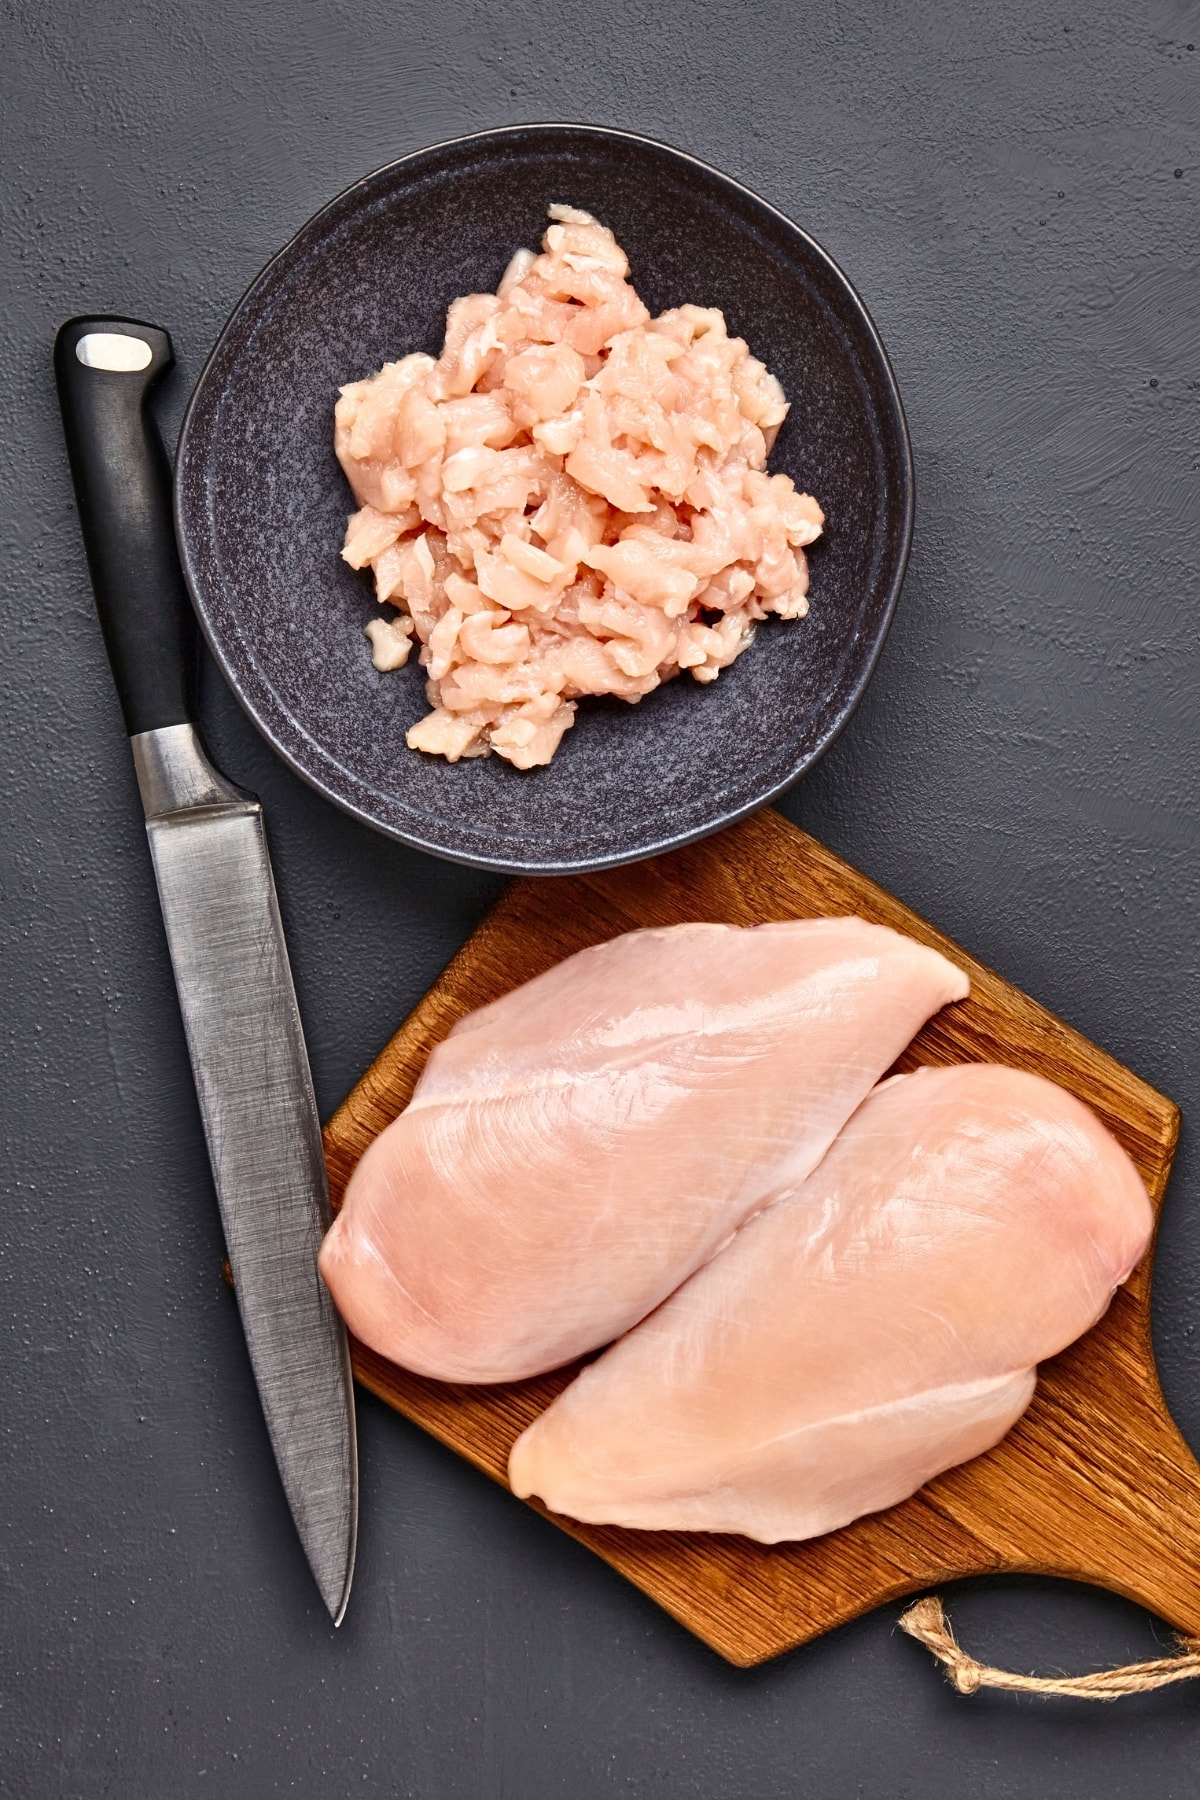 Knife and Raw Chicken Meat 